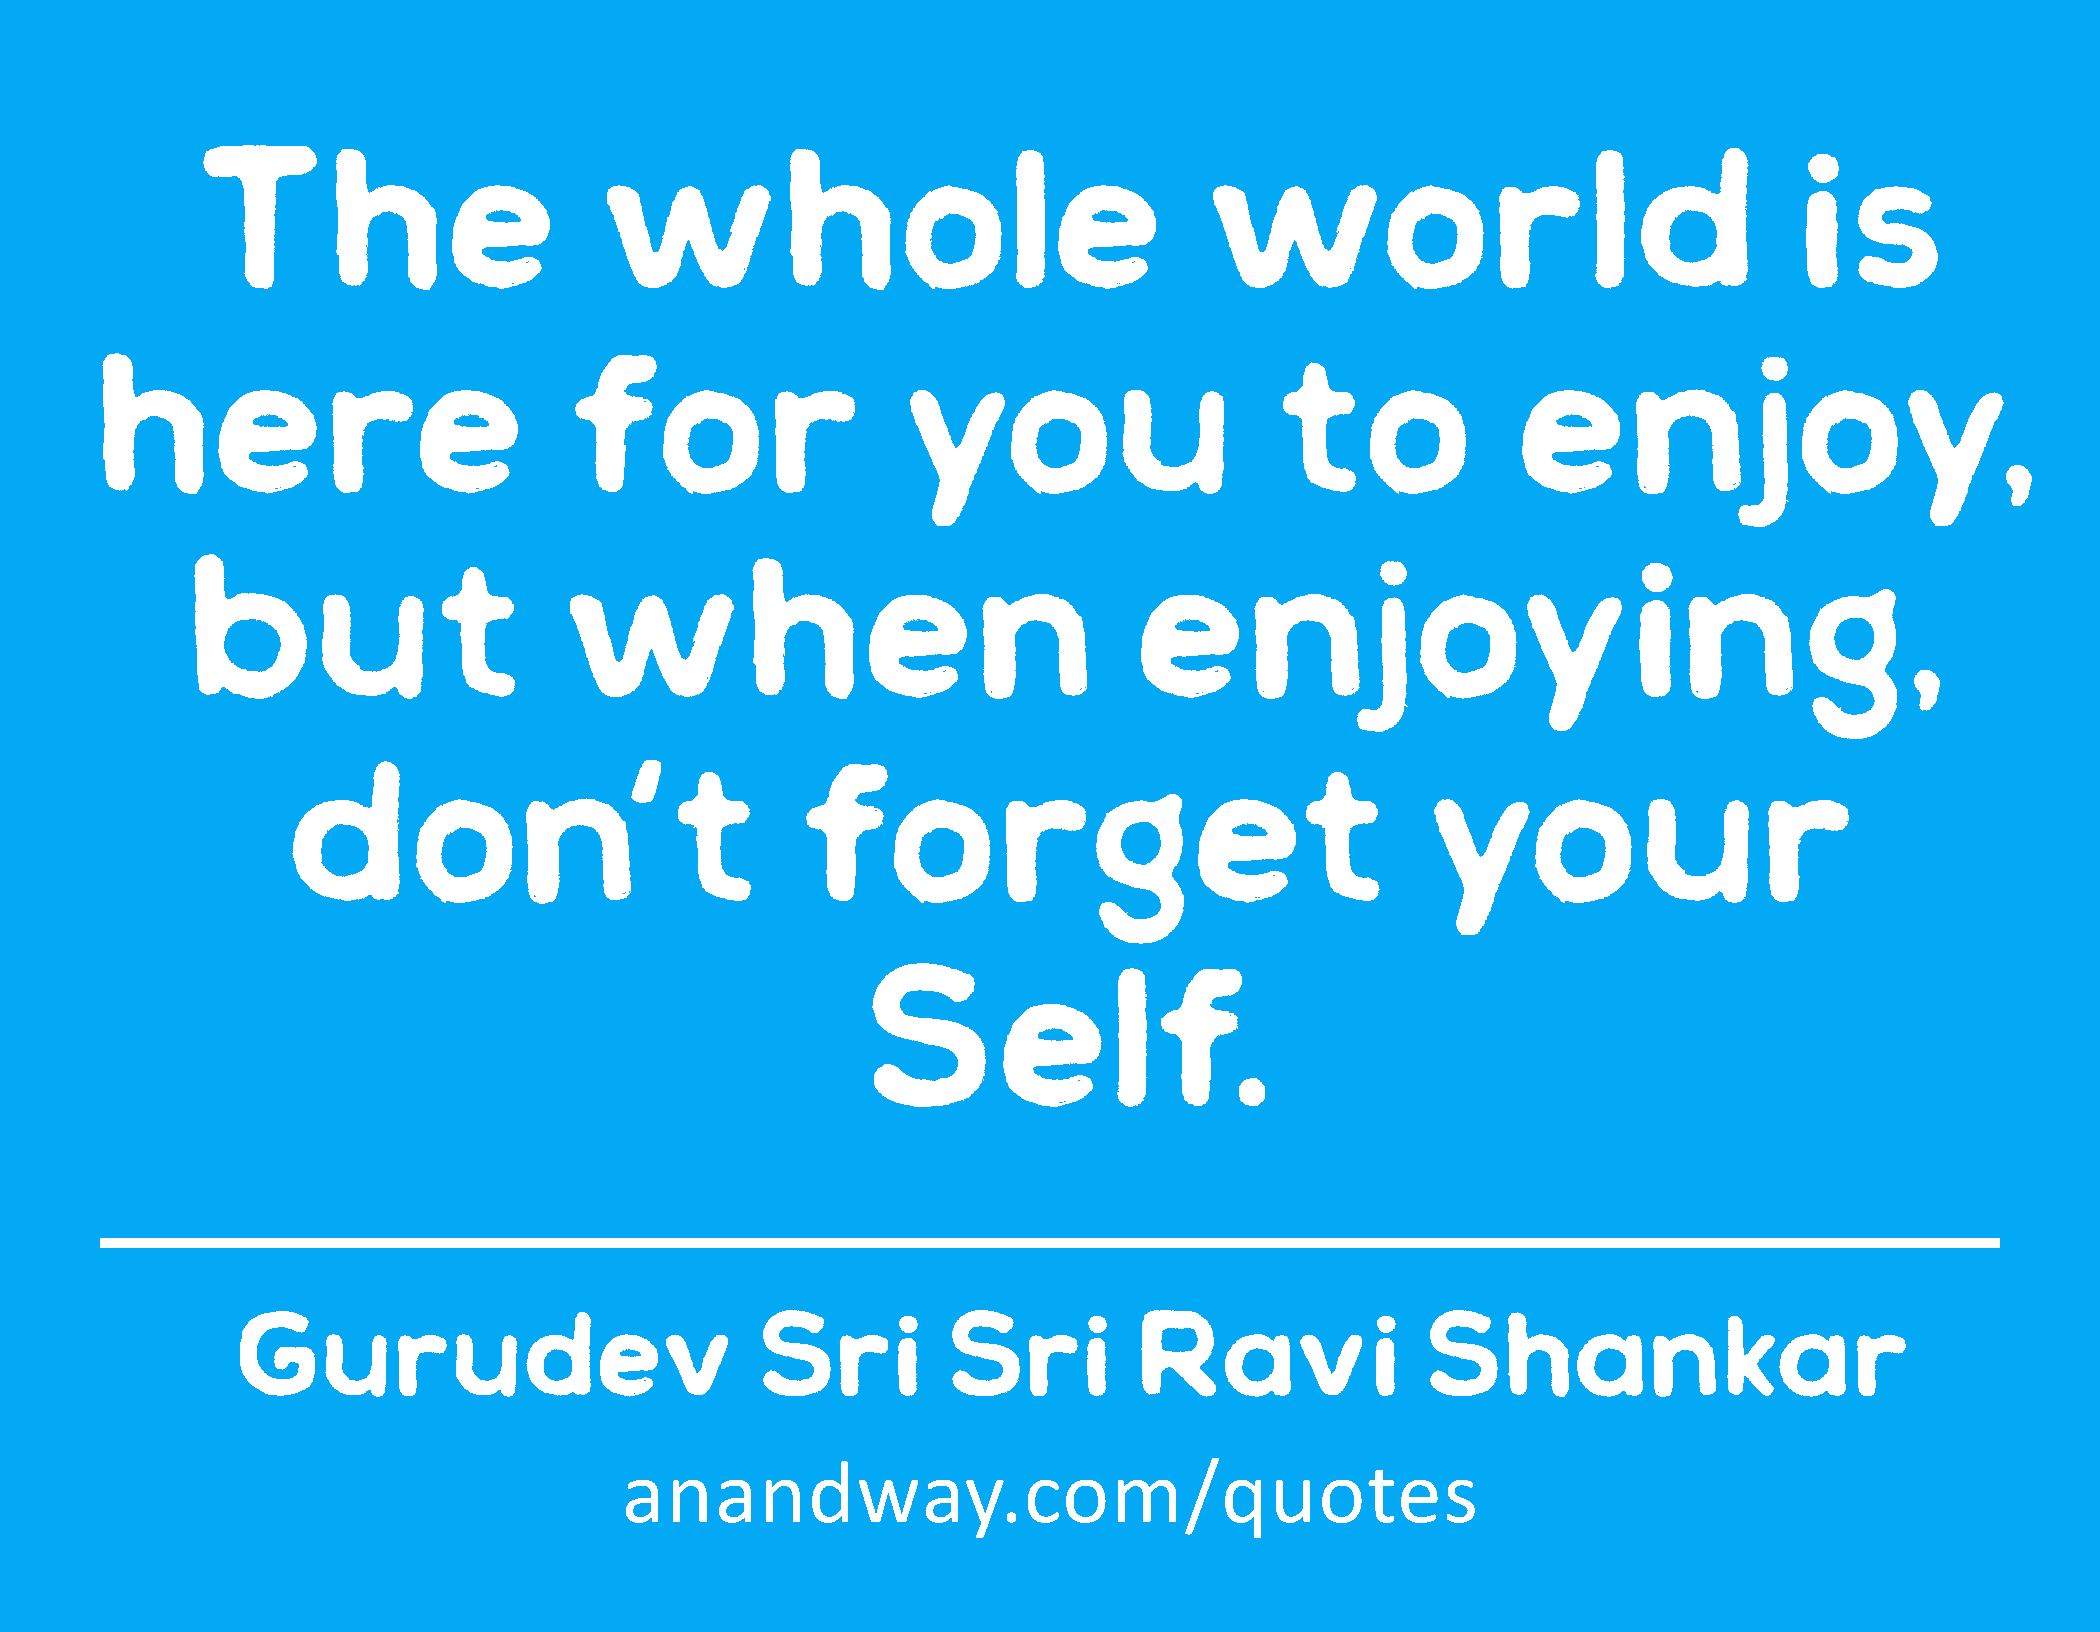 The whole world is here for you to enjoy, but when enjoying, don't forget your Self. 
 -Gurudev Sri Sri Ravi Shankar